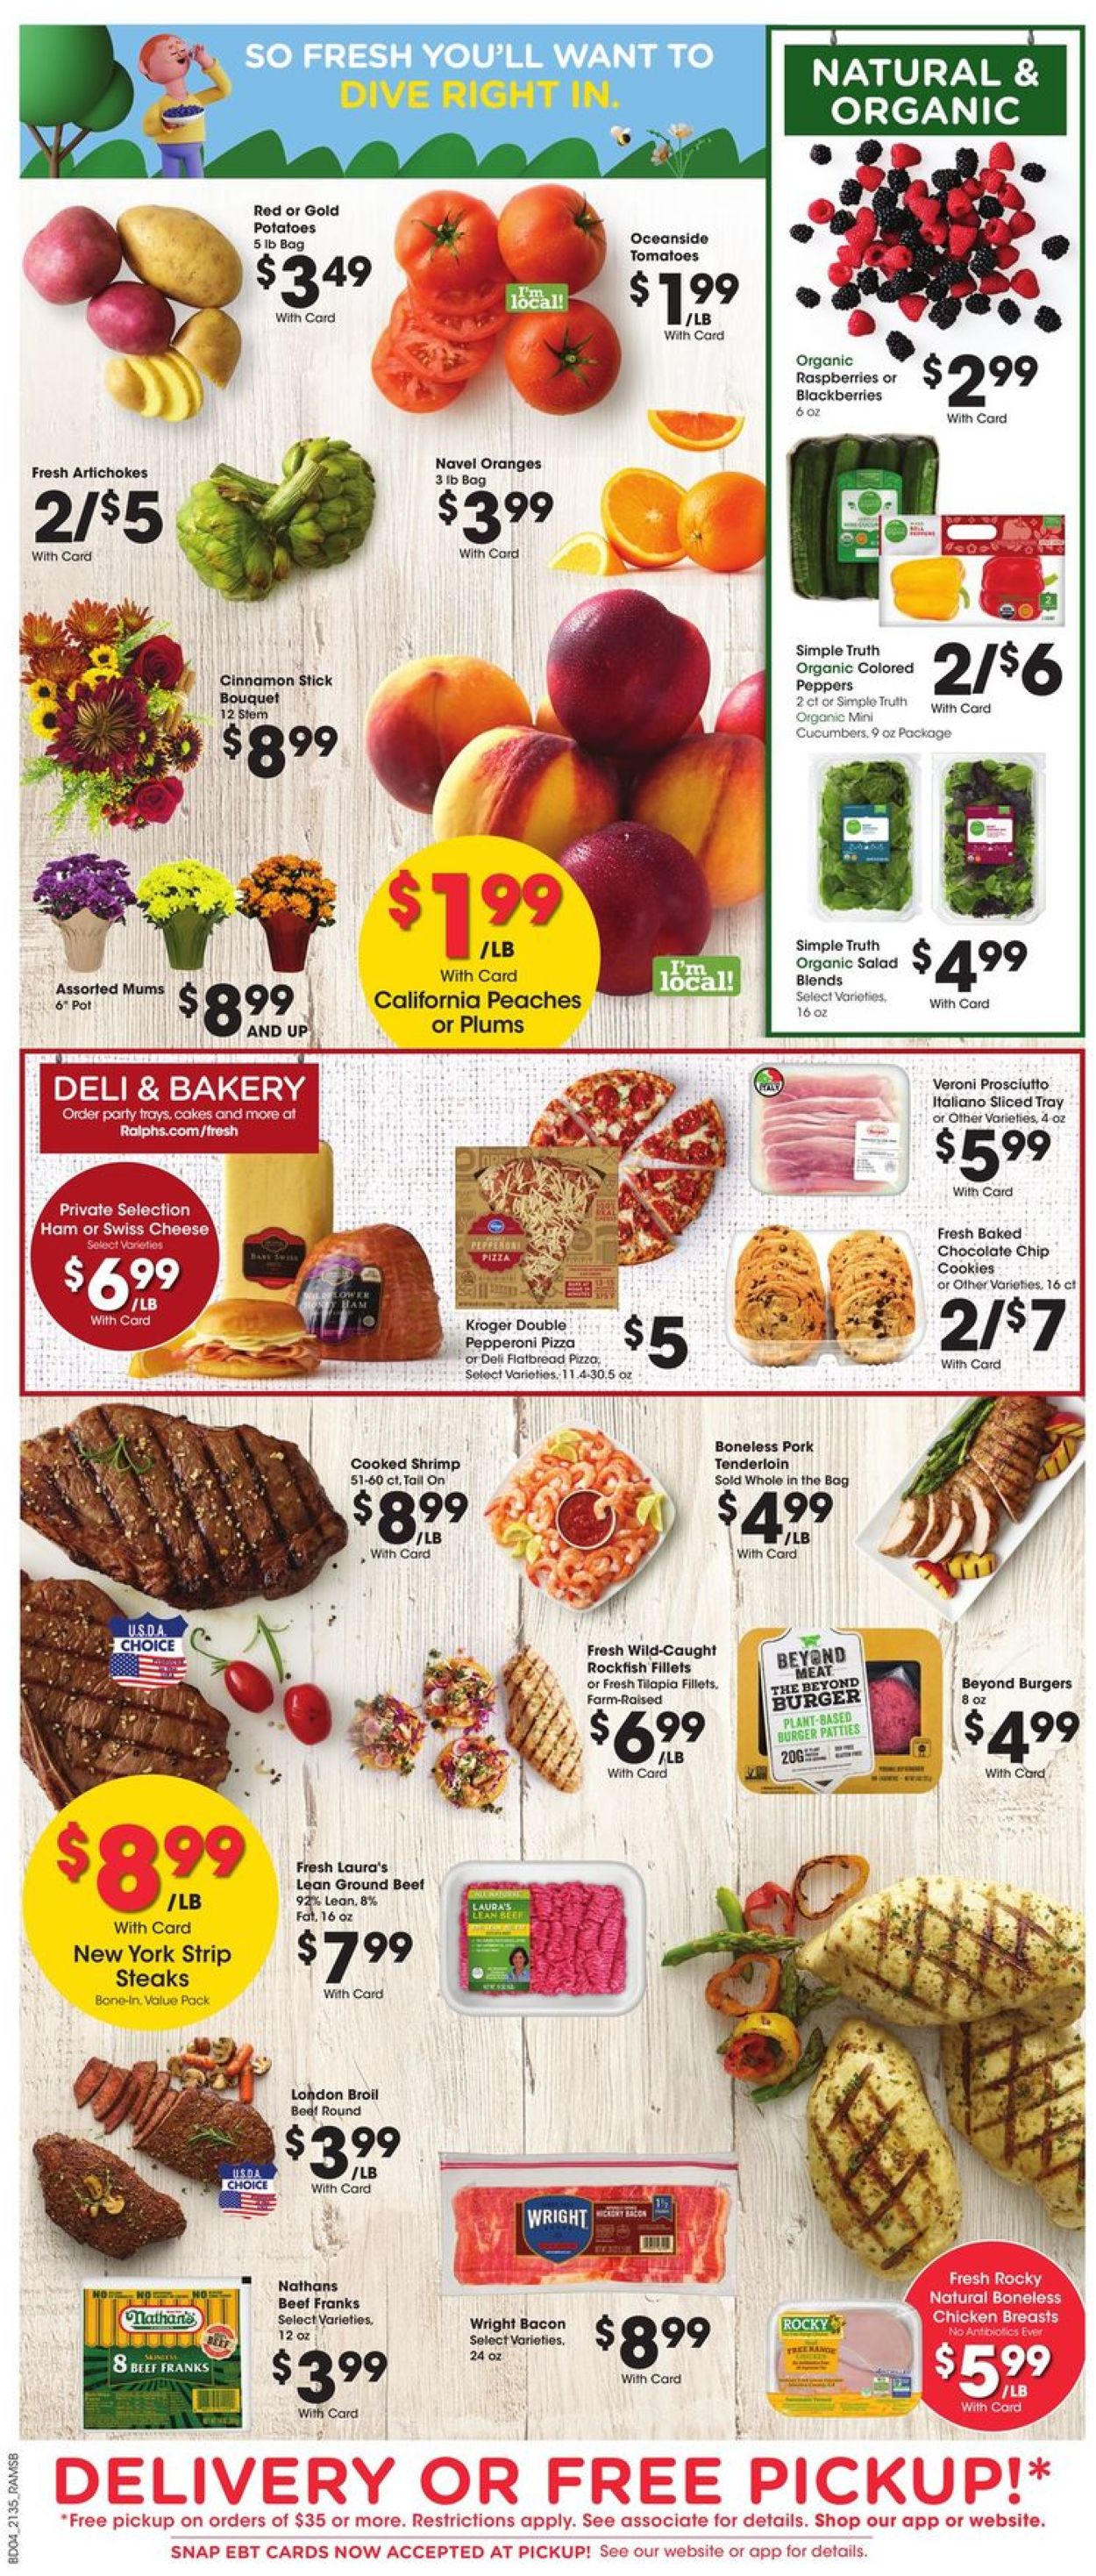 Catalogue Ralphs from 09/29/2021